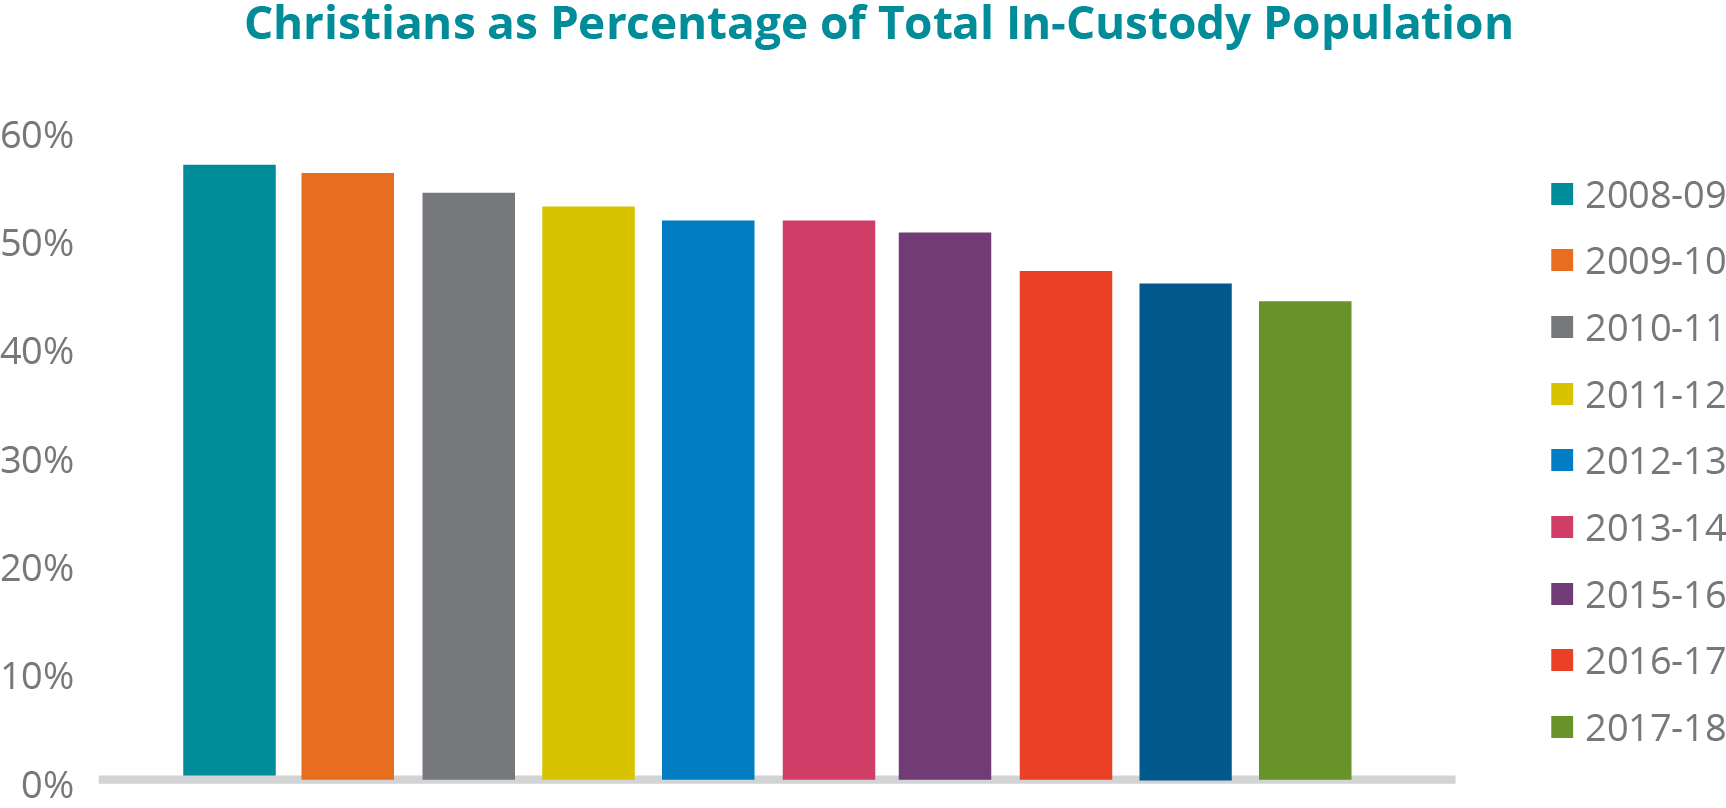 A graph depicting the percentage of the total in-custody population who self-report as Christian, from reporting year 2008-09 to 2018-19: - In 2008-09, 59.08%; 2009-10, 57.89%; 2010-11, 56.58%; 2011-12, 54.86%; 2012-13, 53.86%; 2013-14, 53.88%; 2015-16, 52.51%; 2016-17, 48.99%; 2017-18, 47.74%; and 2018-19, 45.91%.